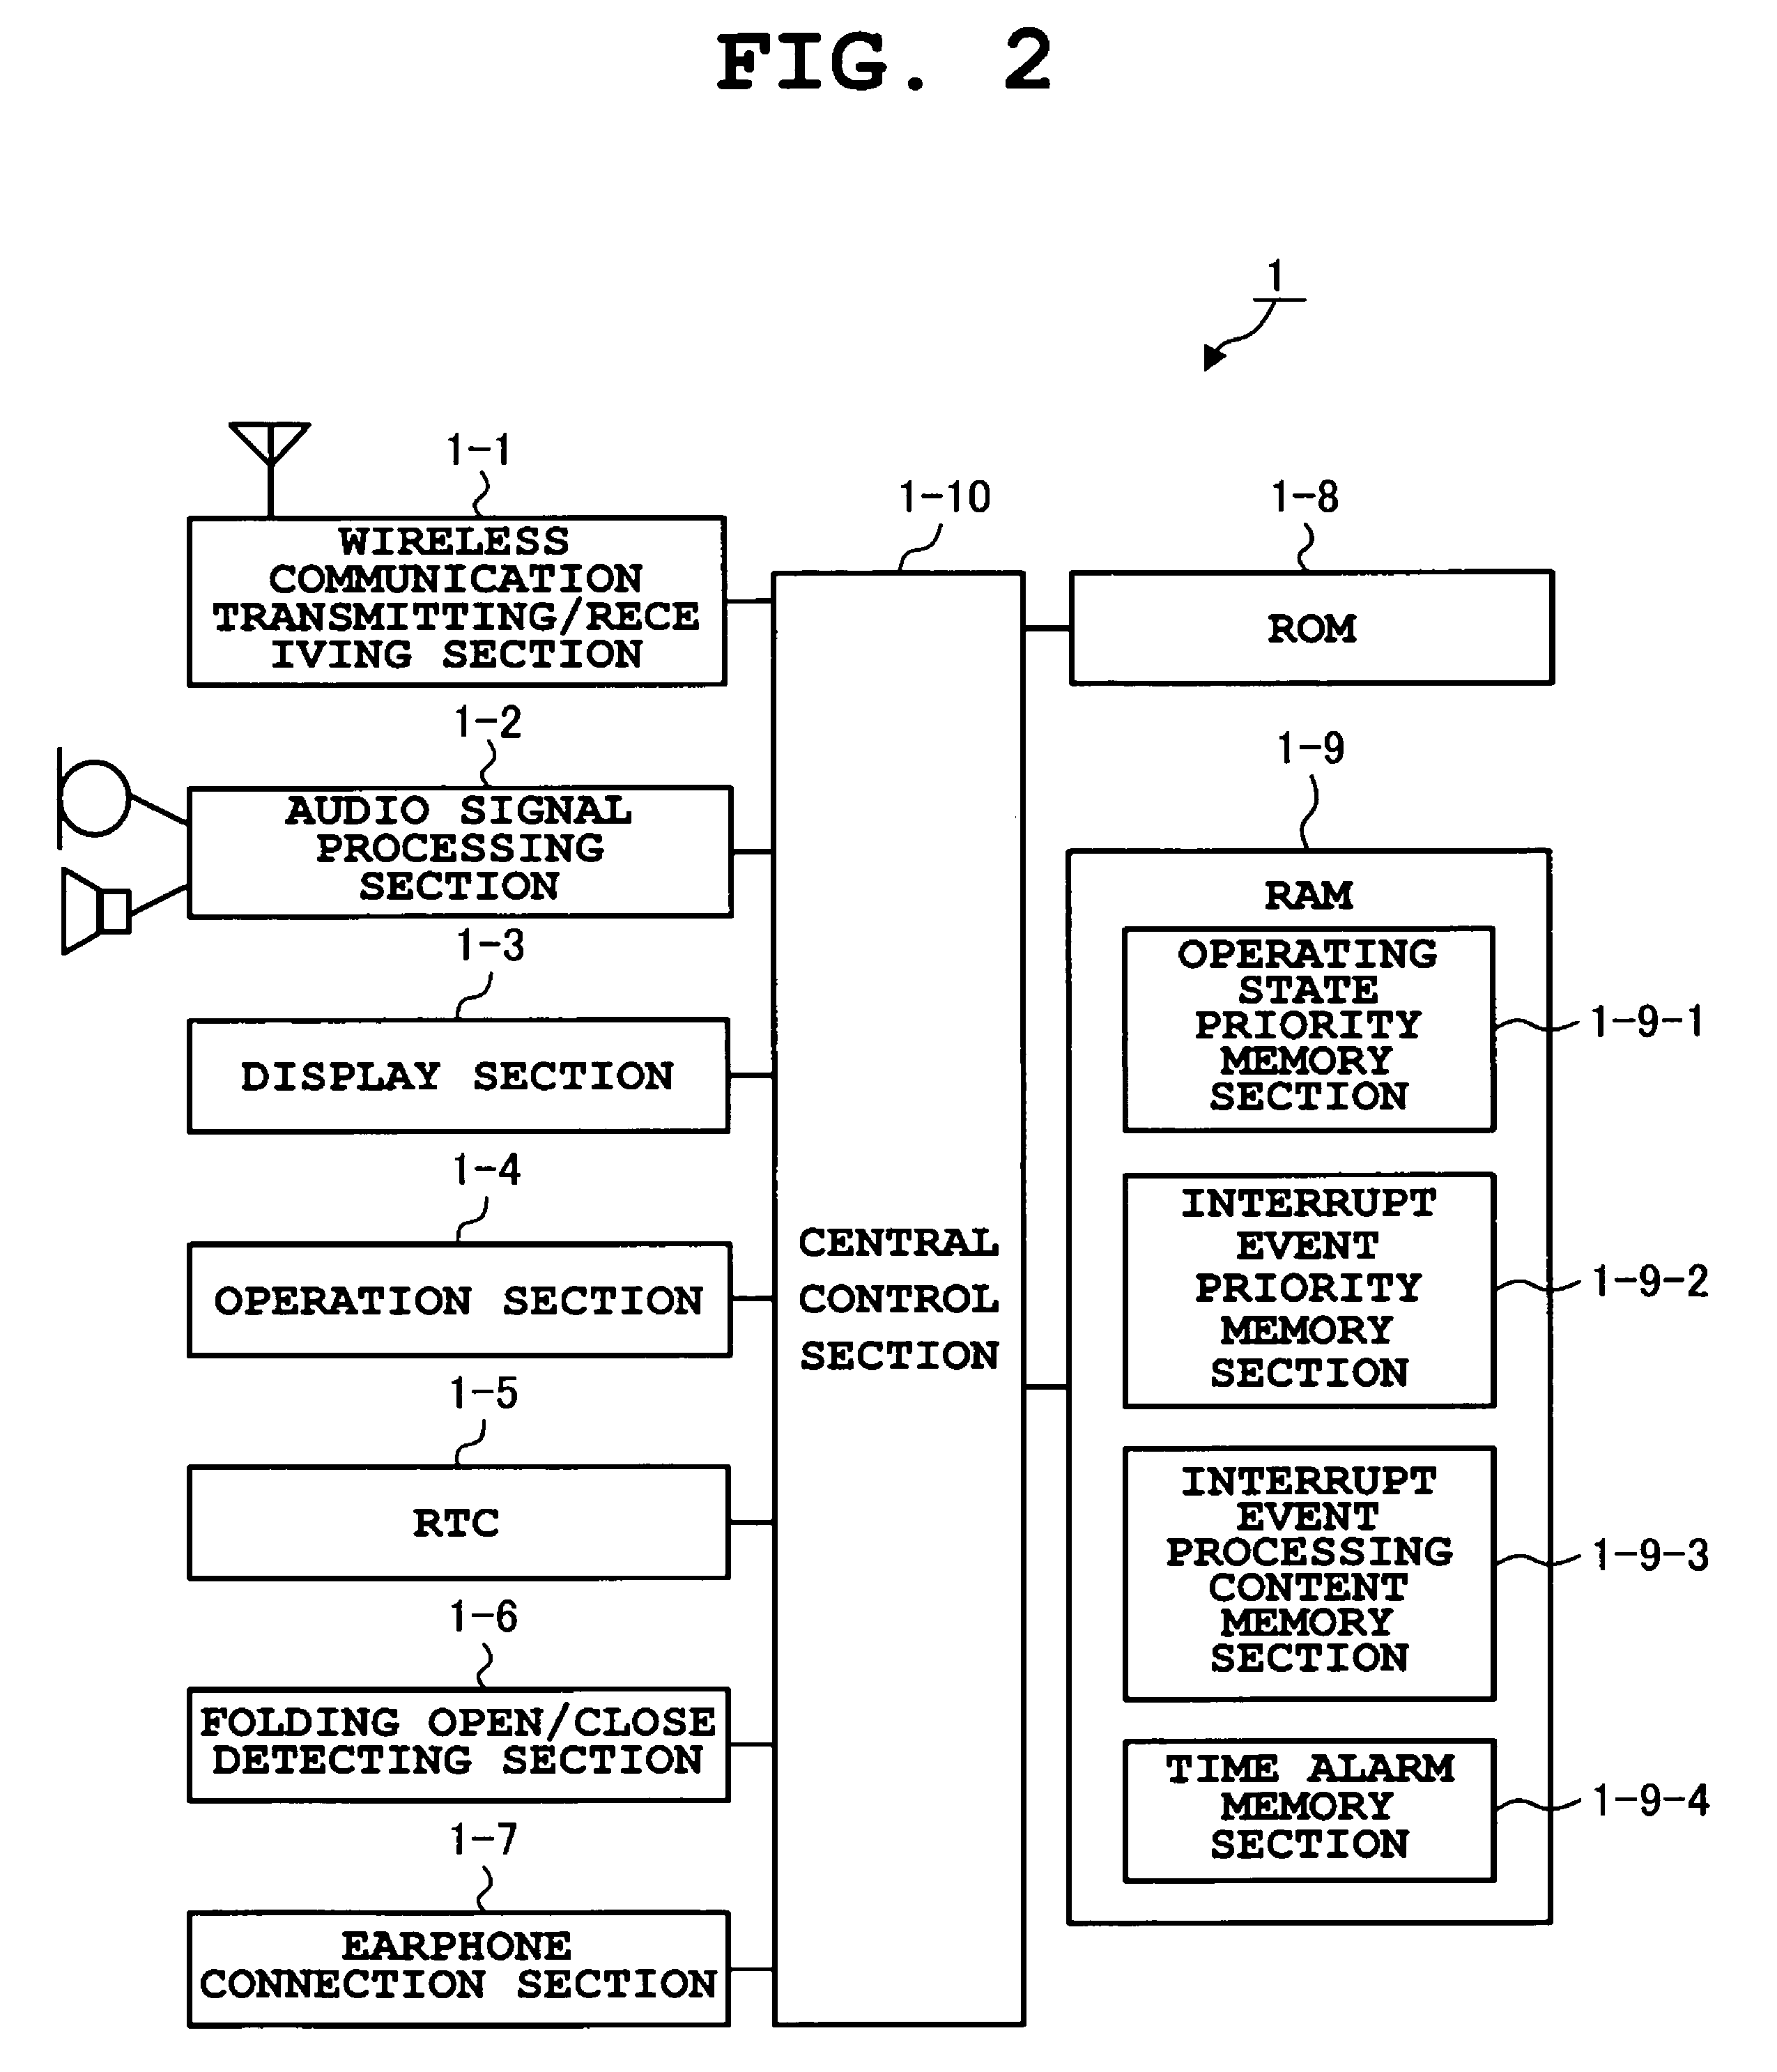 Terminal apparatus and method for controlling processing of an interrupt event